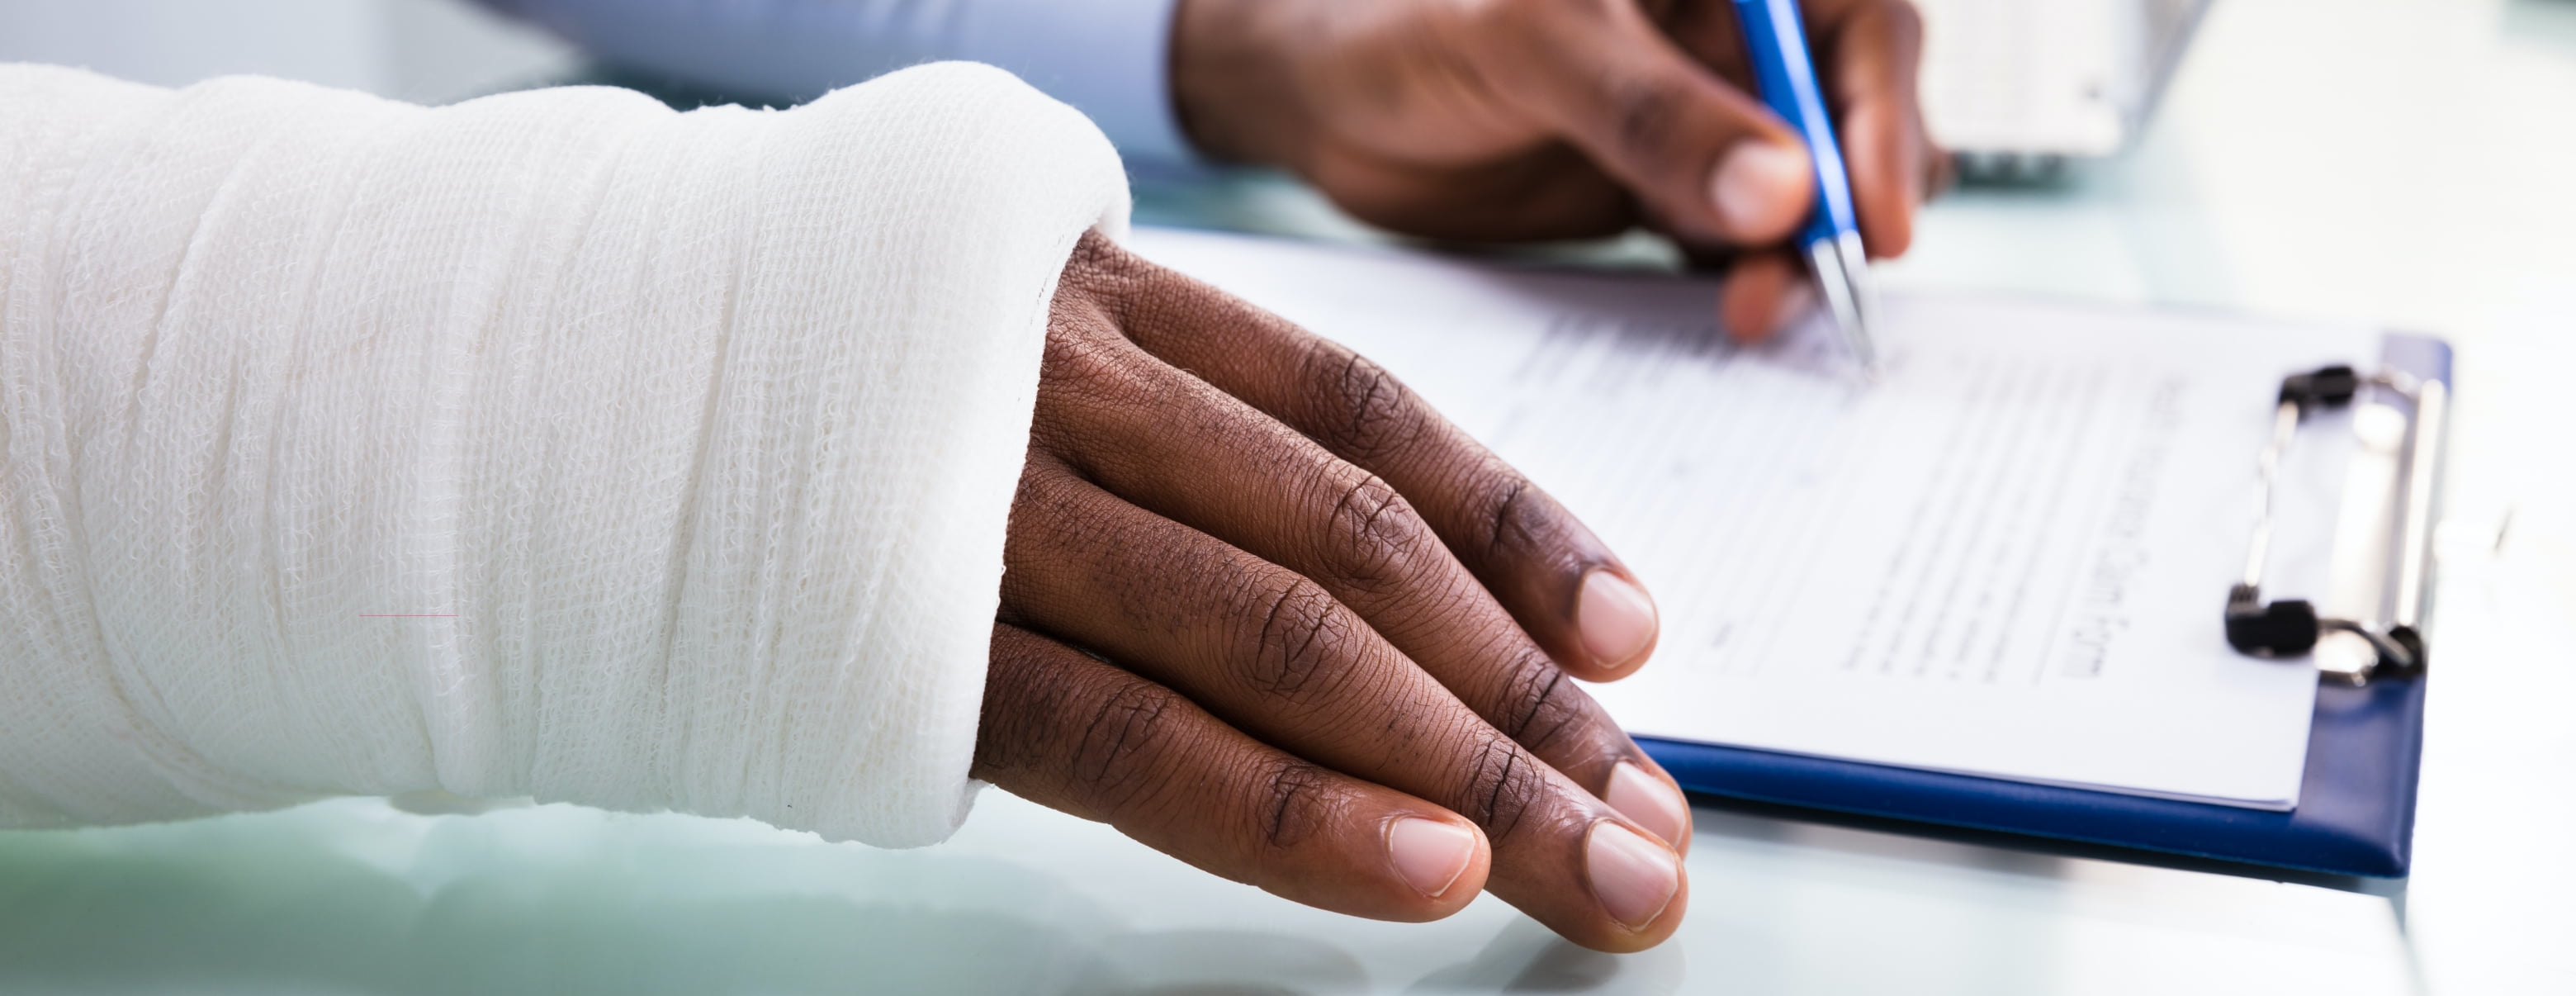 Injured employee with hand in cast - workers' compensation Utah